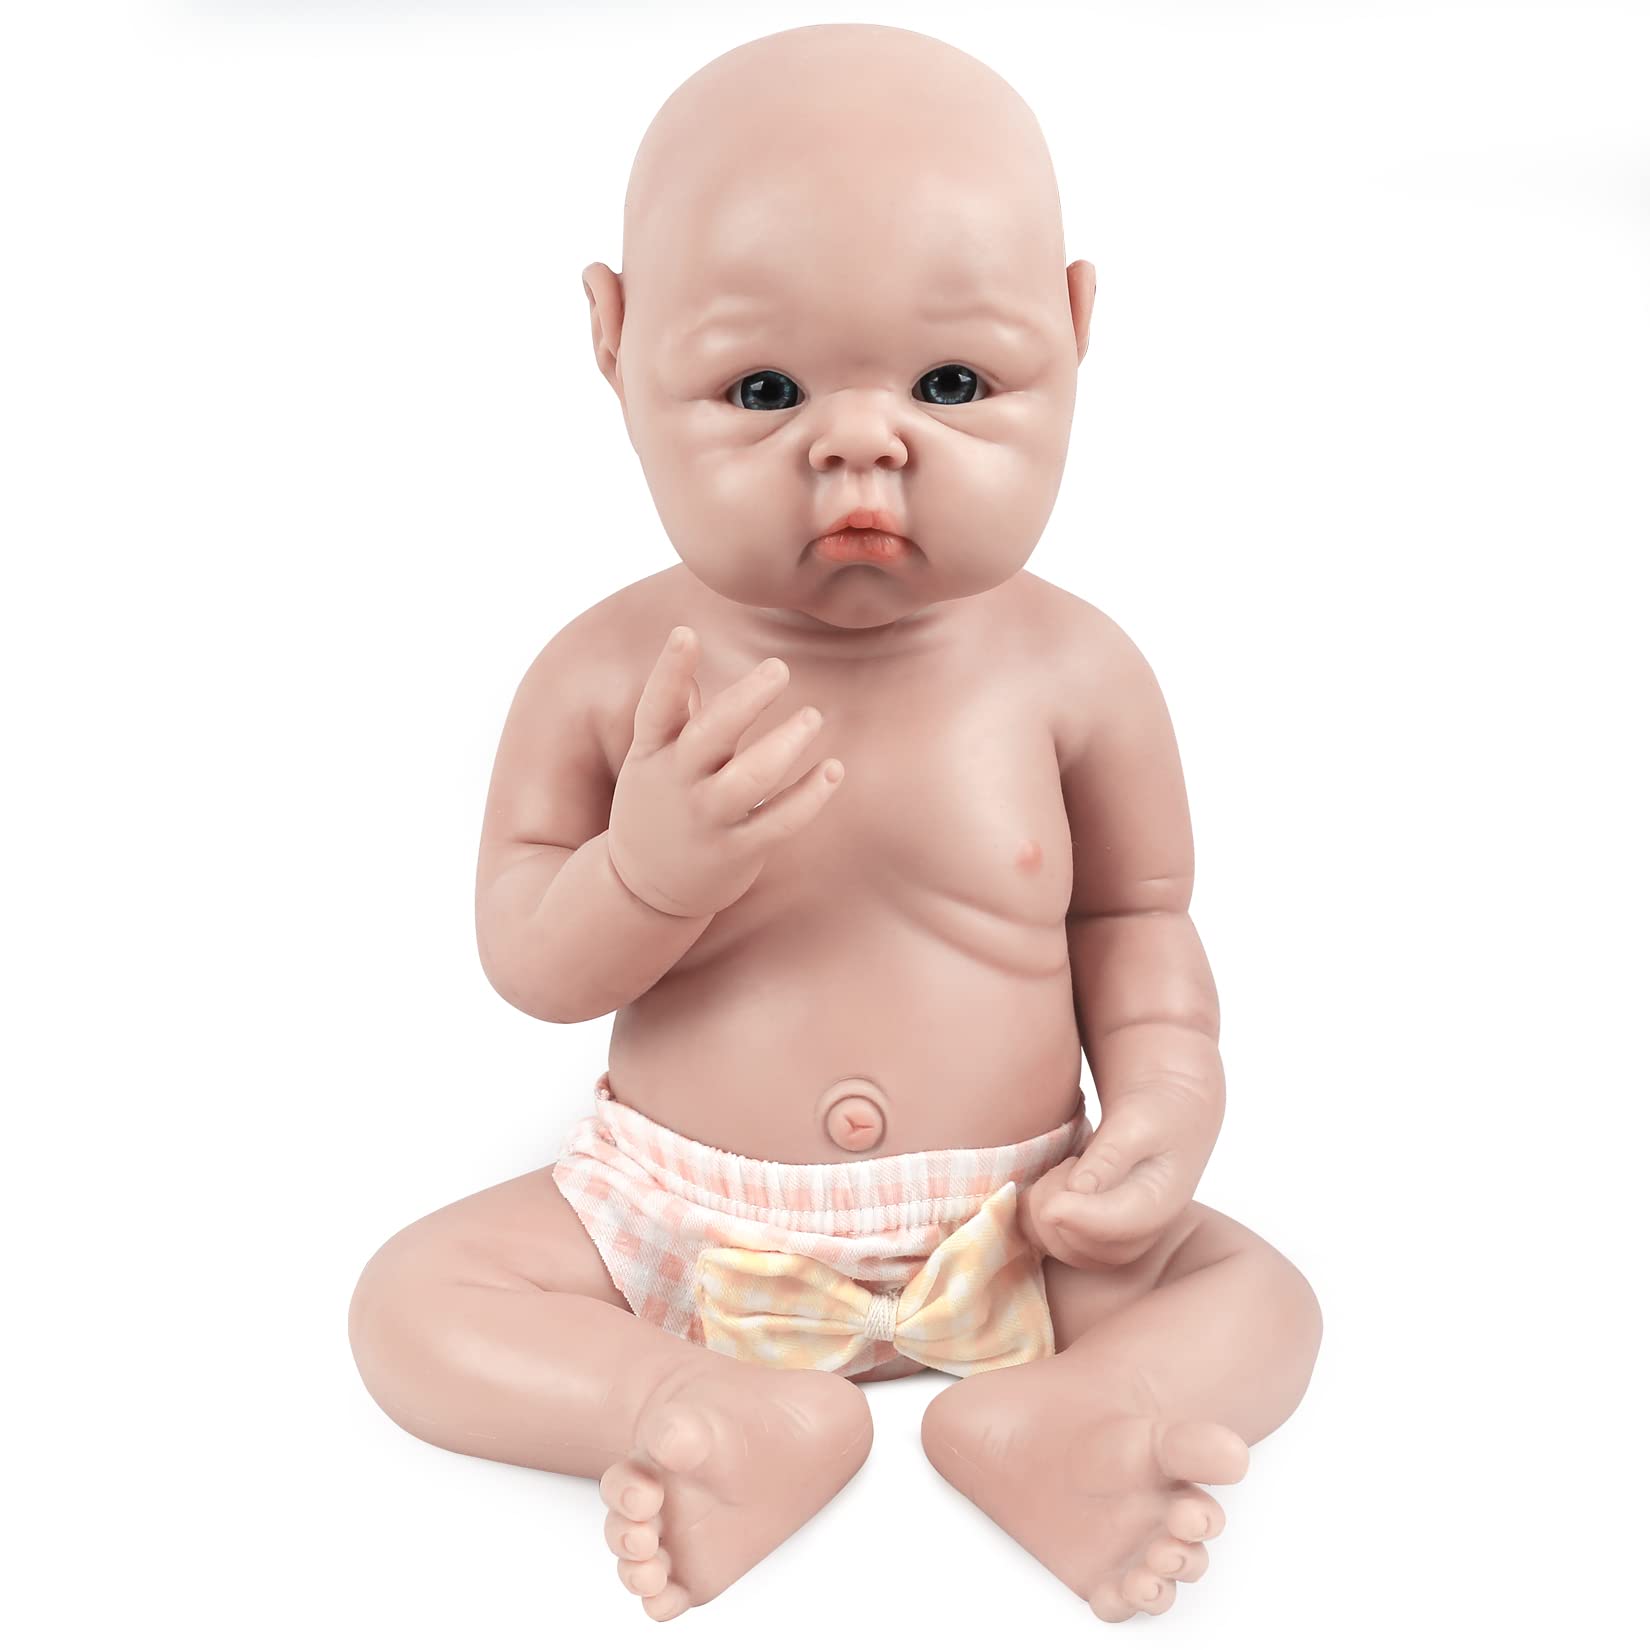 Vollence 19 inch Full Silicone Baby Doll,Not Vinyl Material Dolls,Reborn Baby Doll,Realistic Real Baby Doll,Lifelike Baby Dolls - Girl